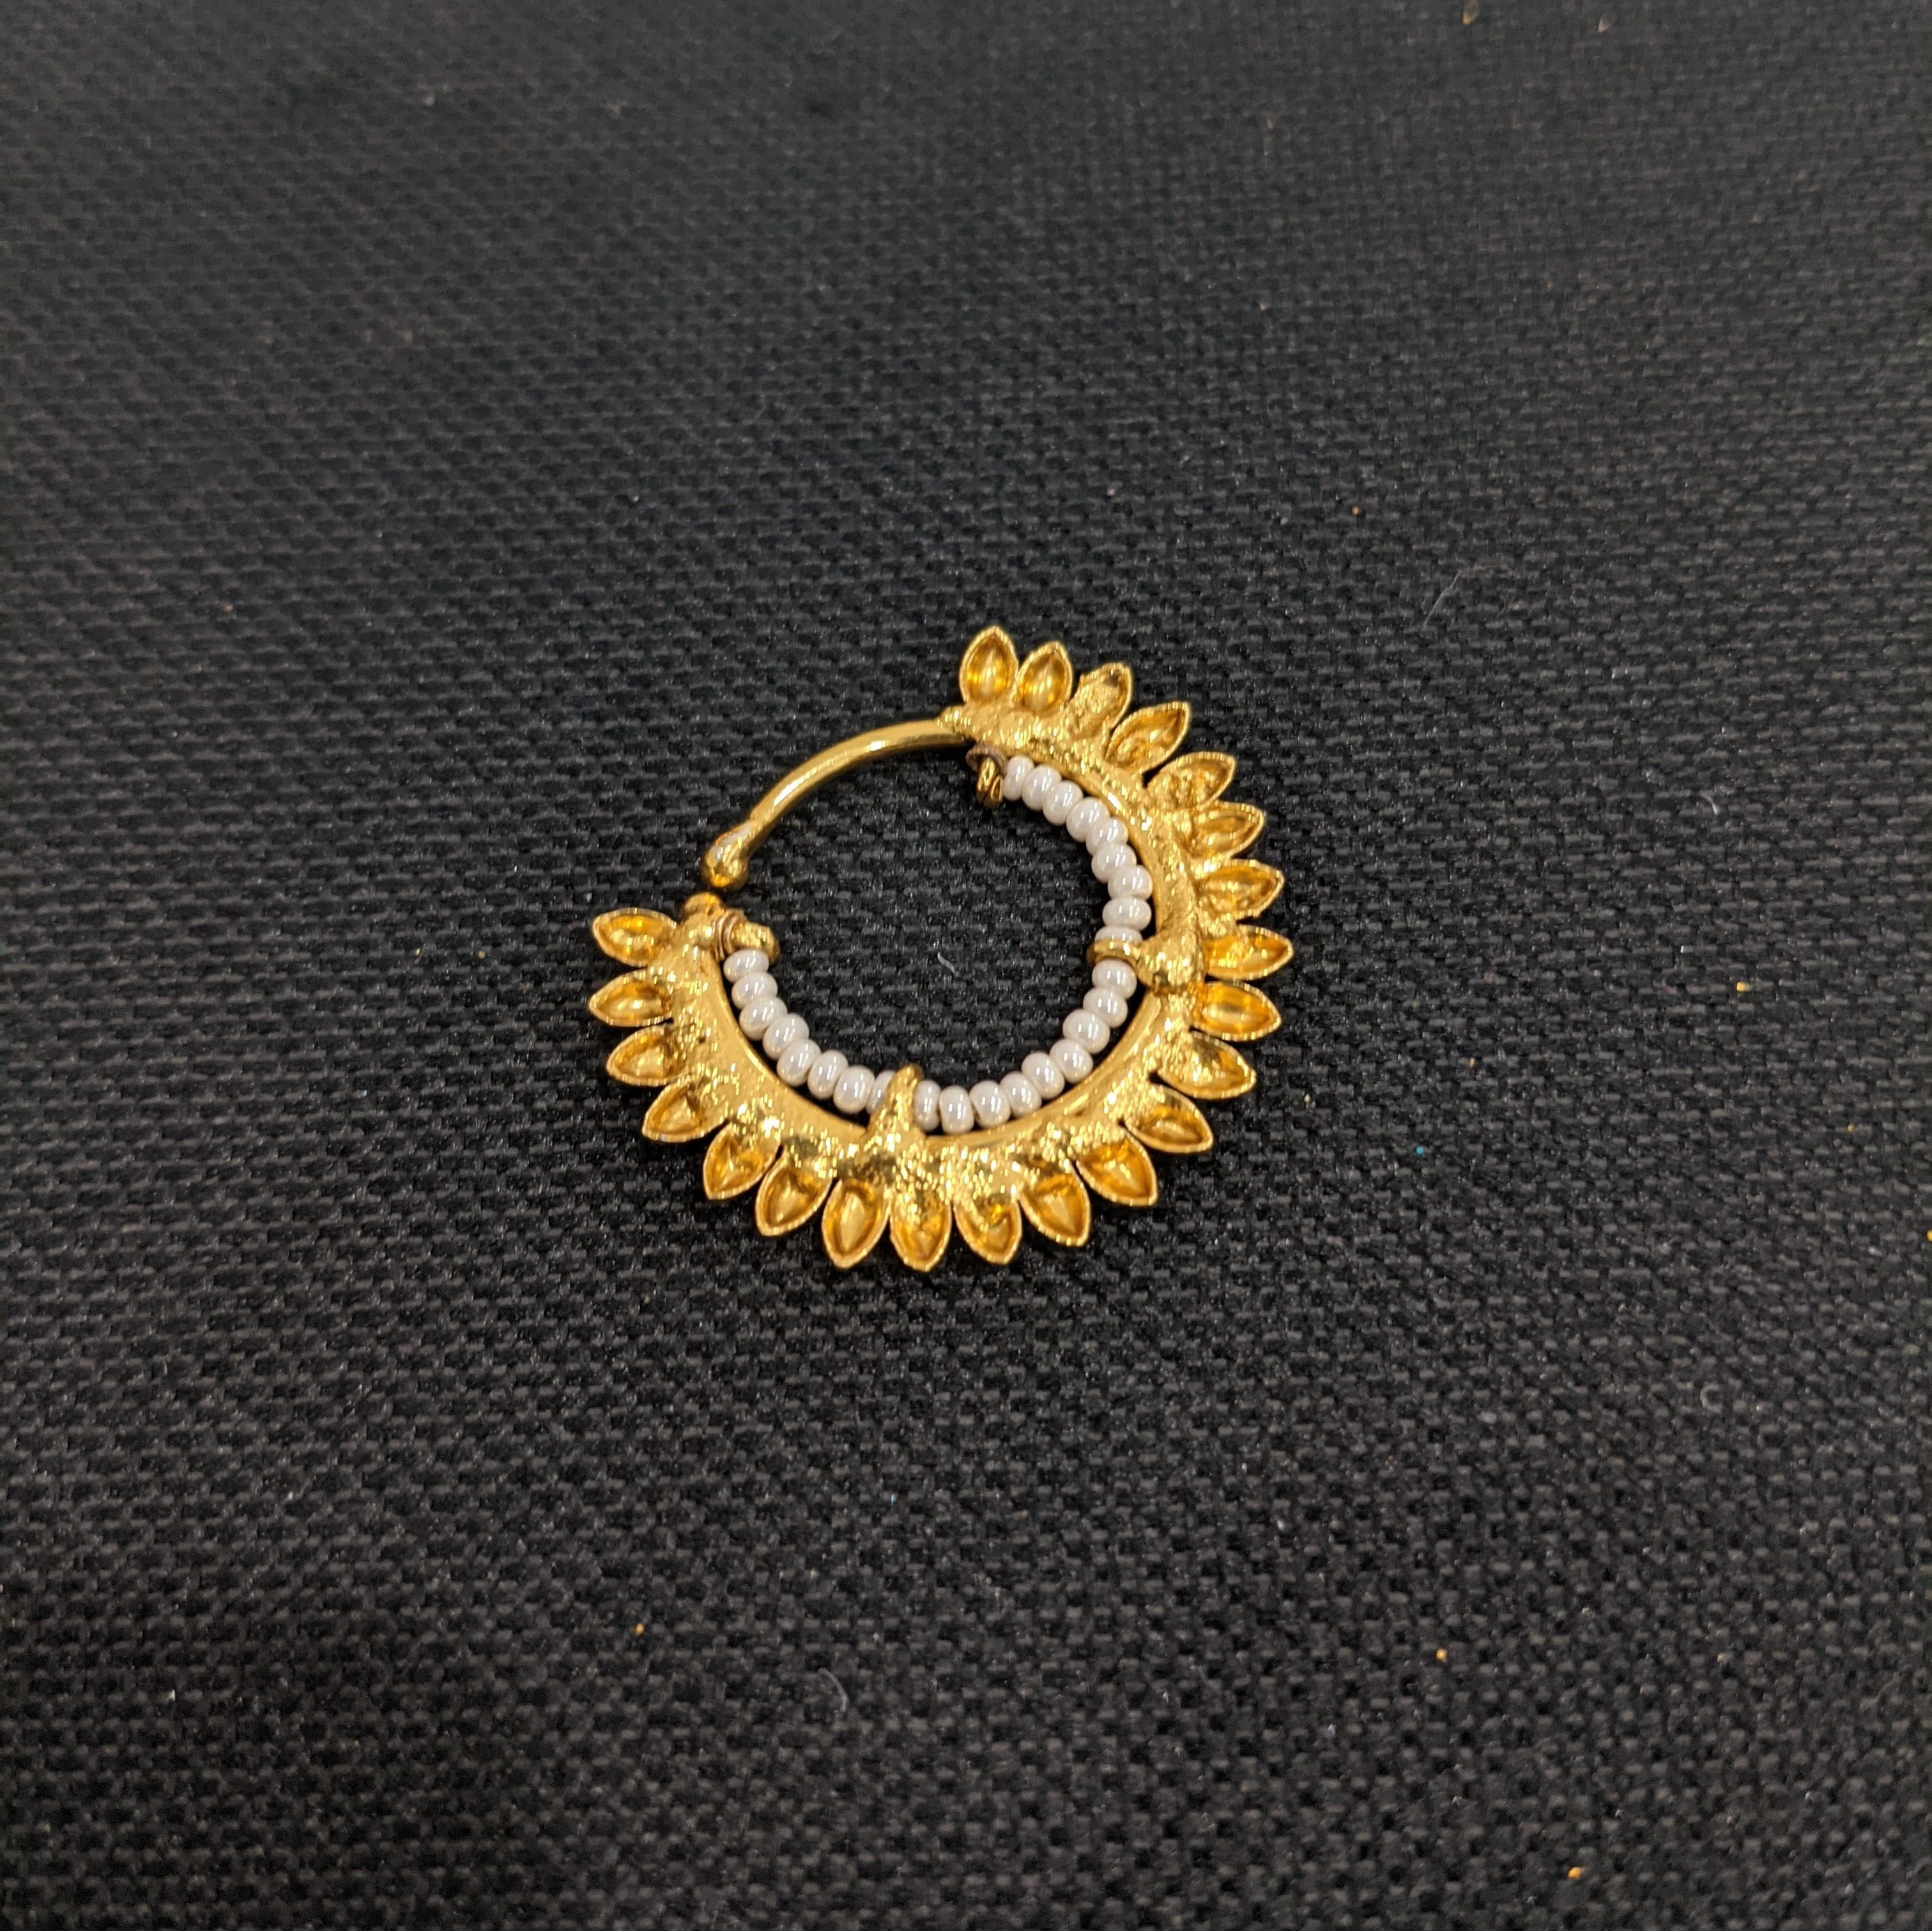 Wholesale Nose Rings and Studs- Unique Handmade Designs. – indiannosering